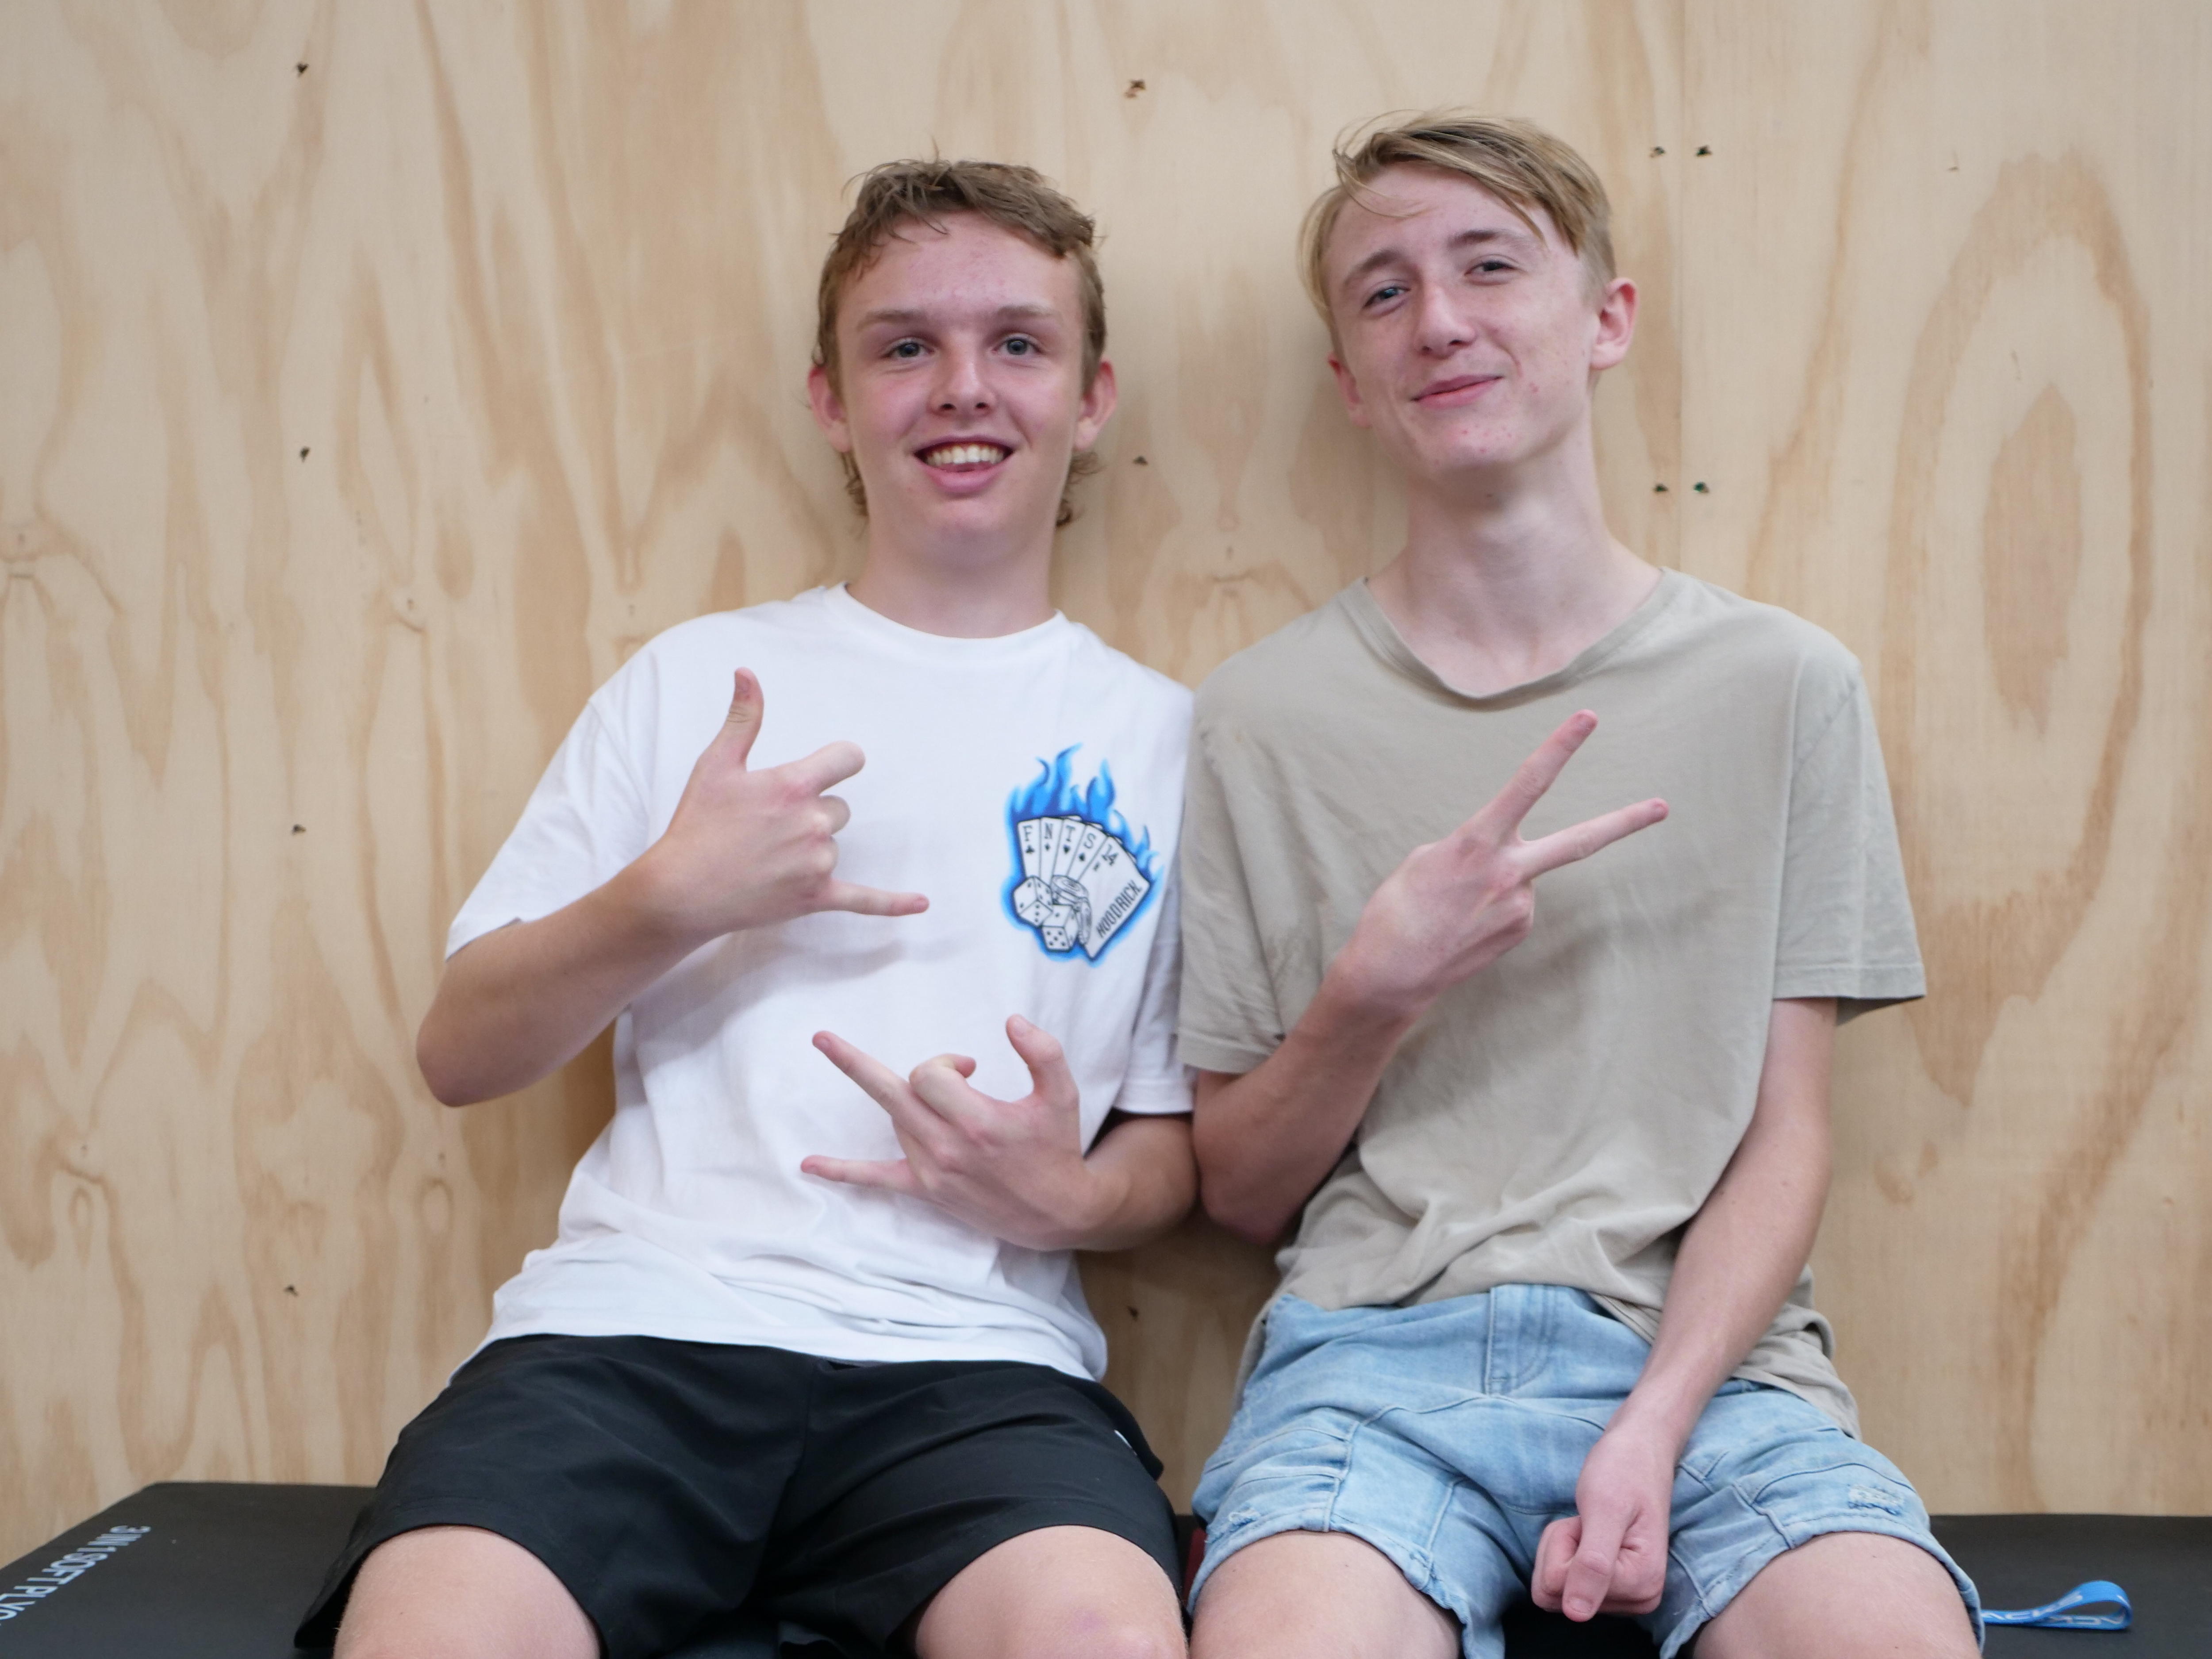 Two teen age boys sit together doing gang signs smiling 